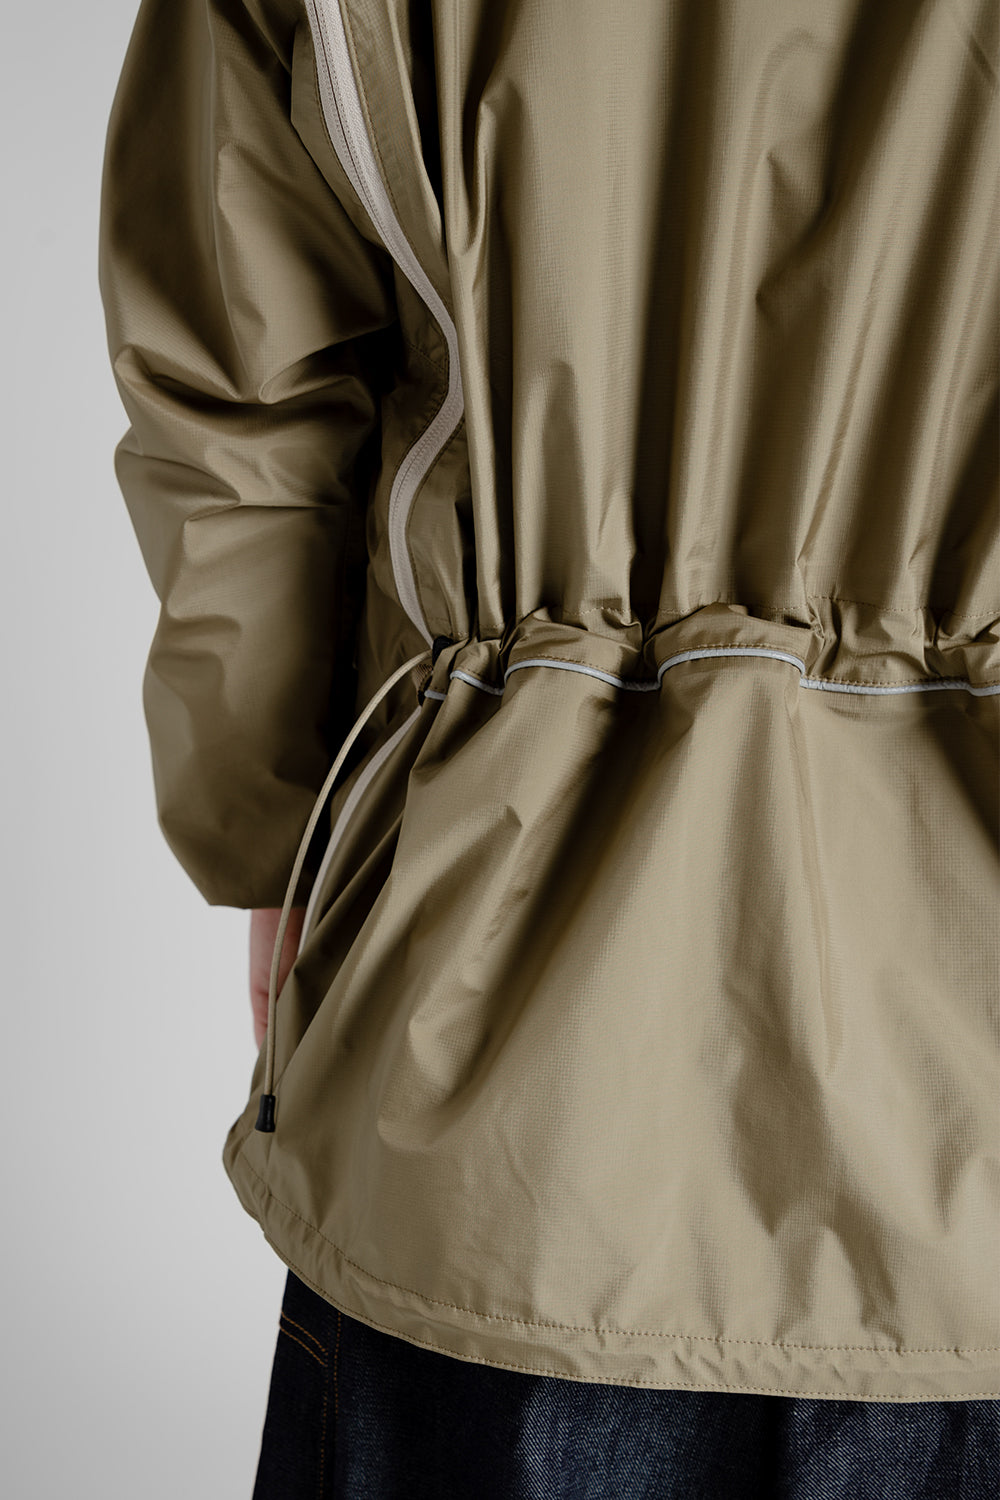 Is-Ness 3Layer Transformable Jacket in Beige.